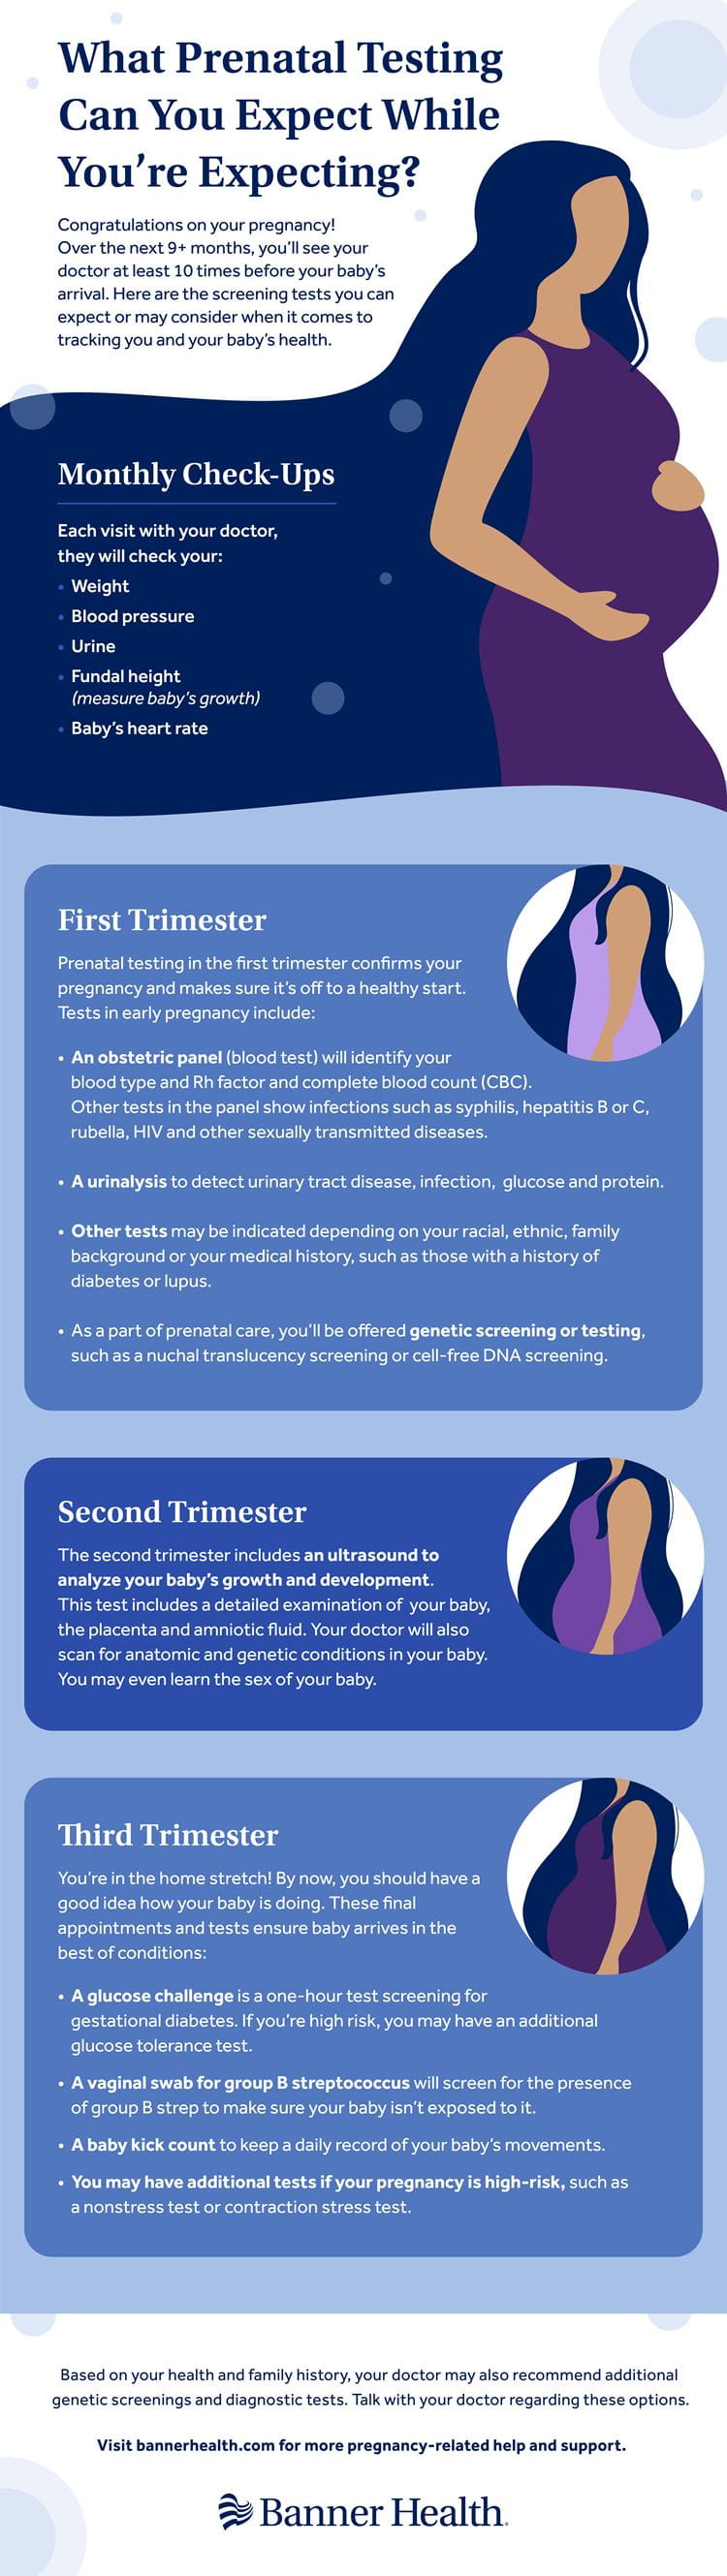 Prenatal Tests to Expect by Trimester Infographic